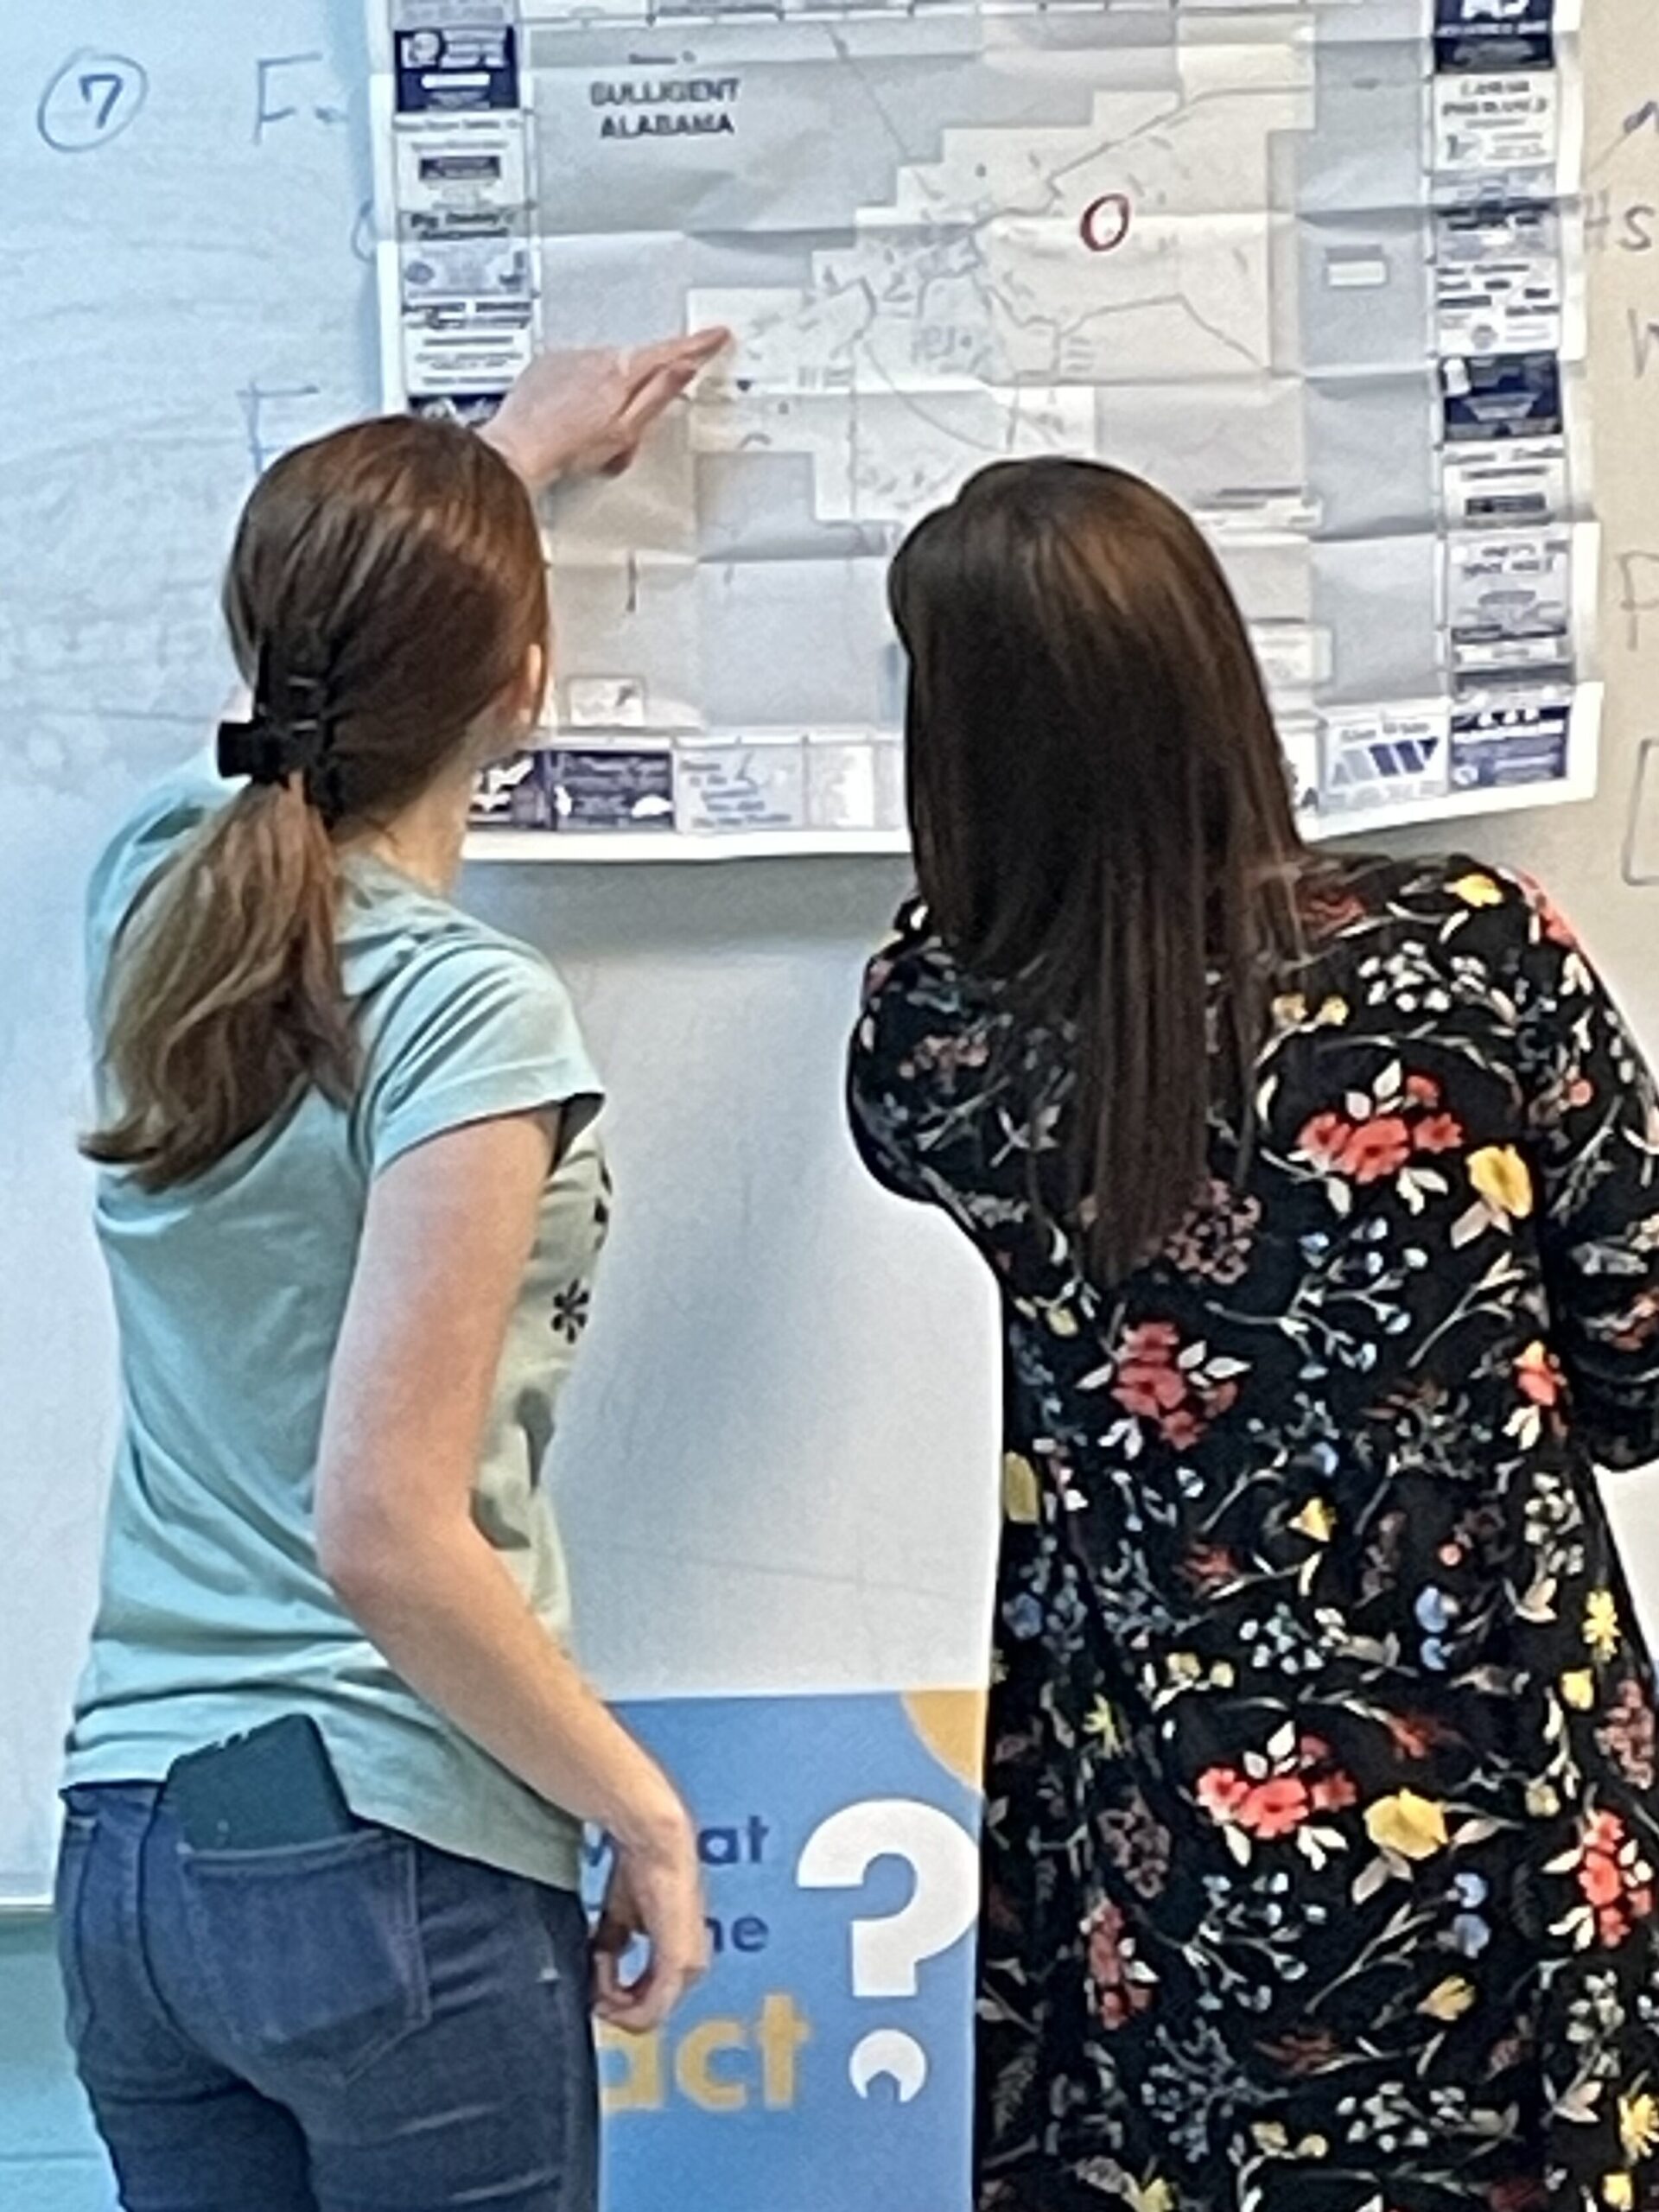 Community Liaison Kacie Long and a student look and point at a map of Sulligent handing on a whiteboard.